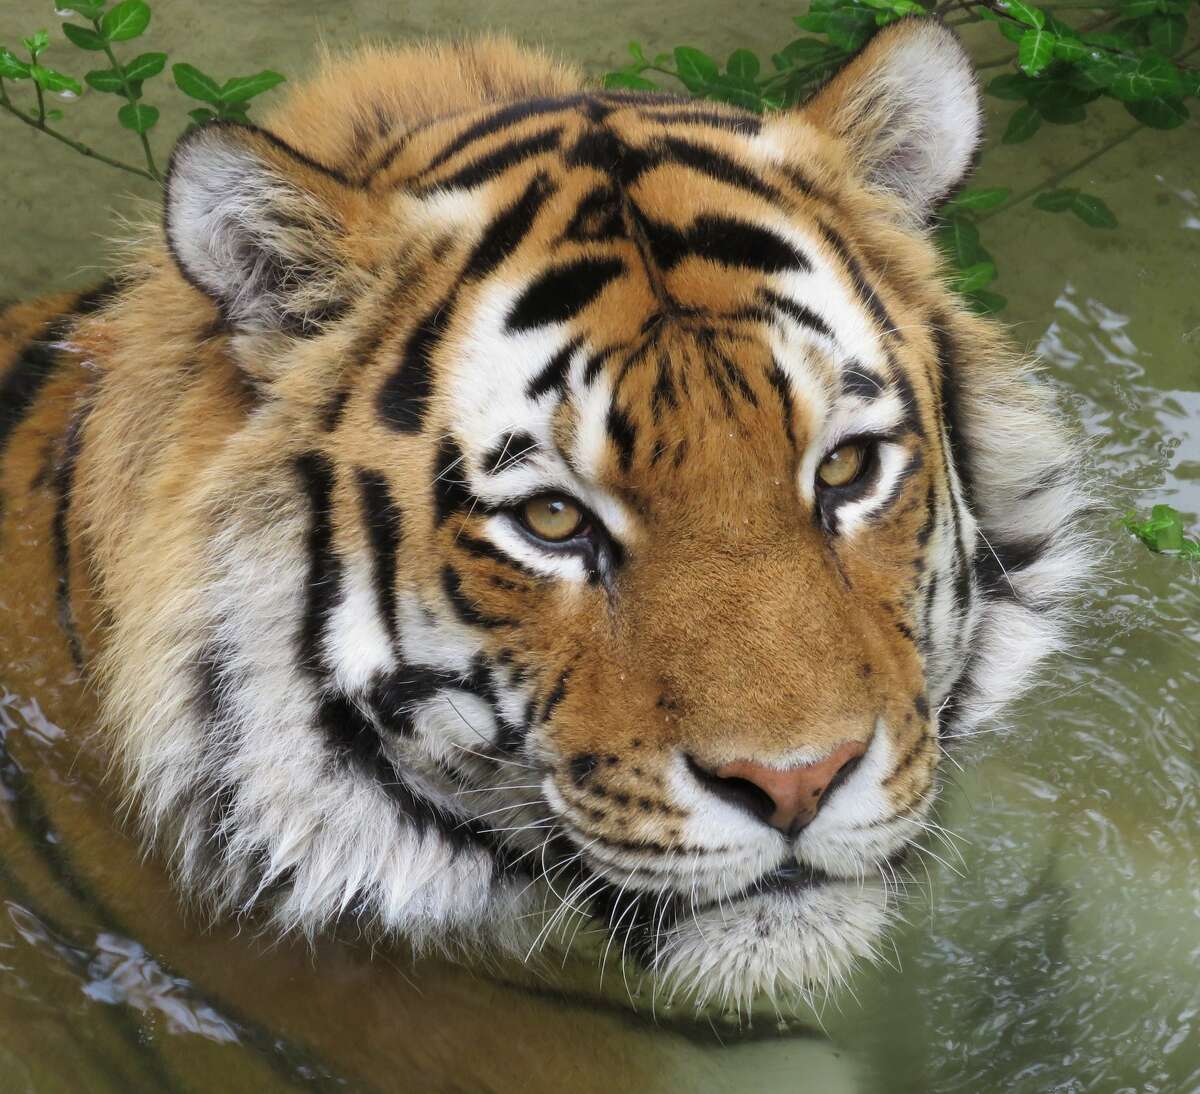 The tiger that passed away was an Amur tiger name Waldemere. He had a "brief, but serious illness," along with an "age related joint disease, and dental disease," the zoo stated.